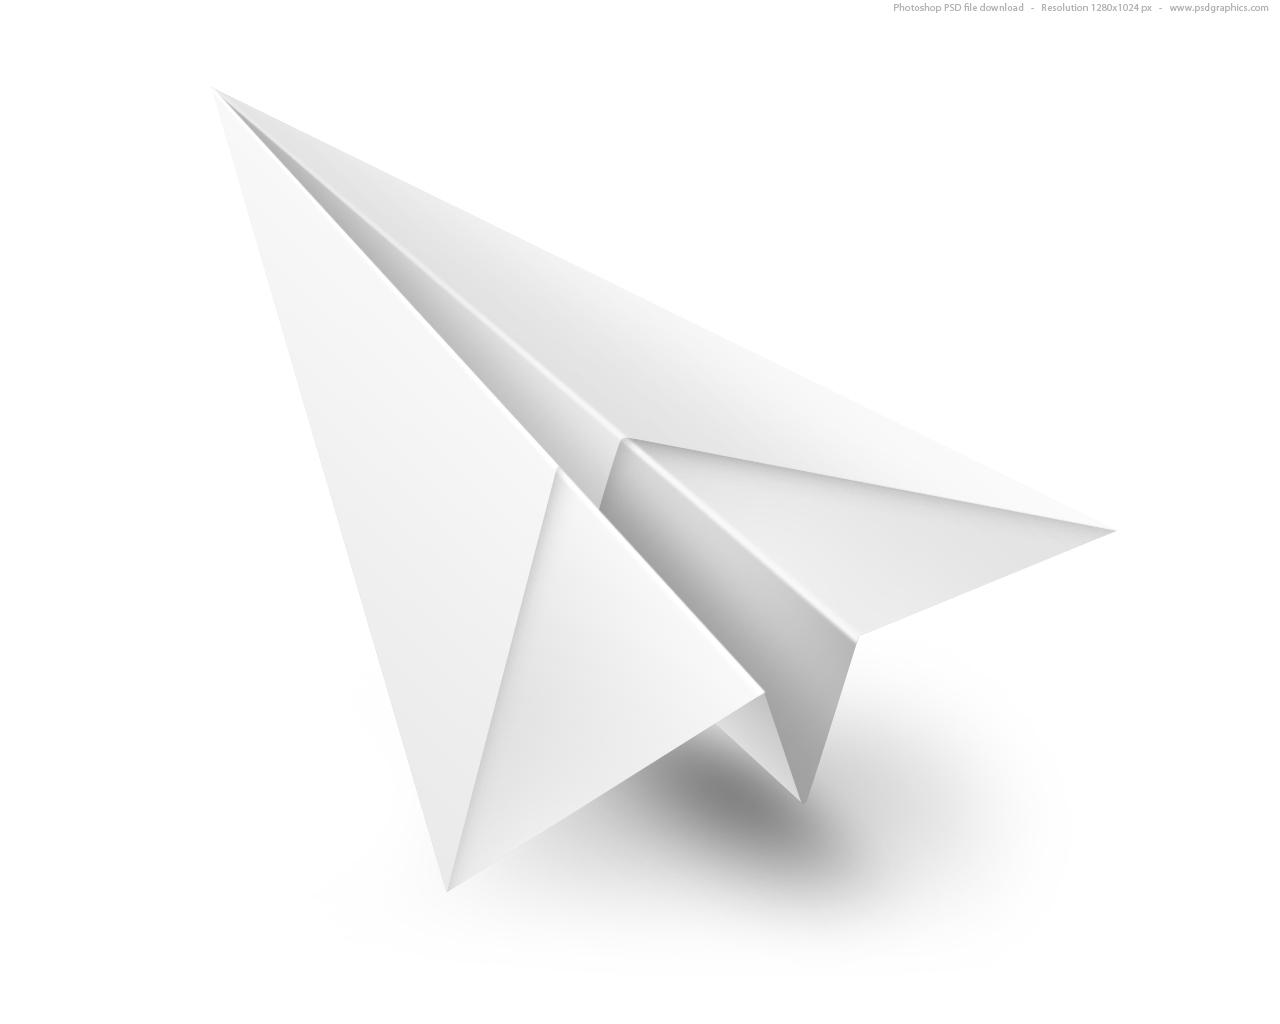 paper-airplane